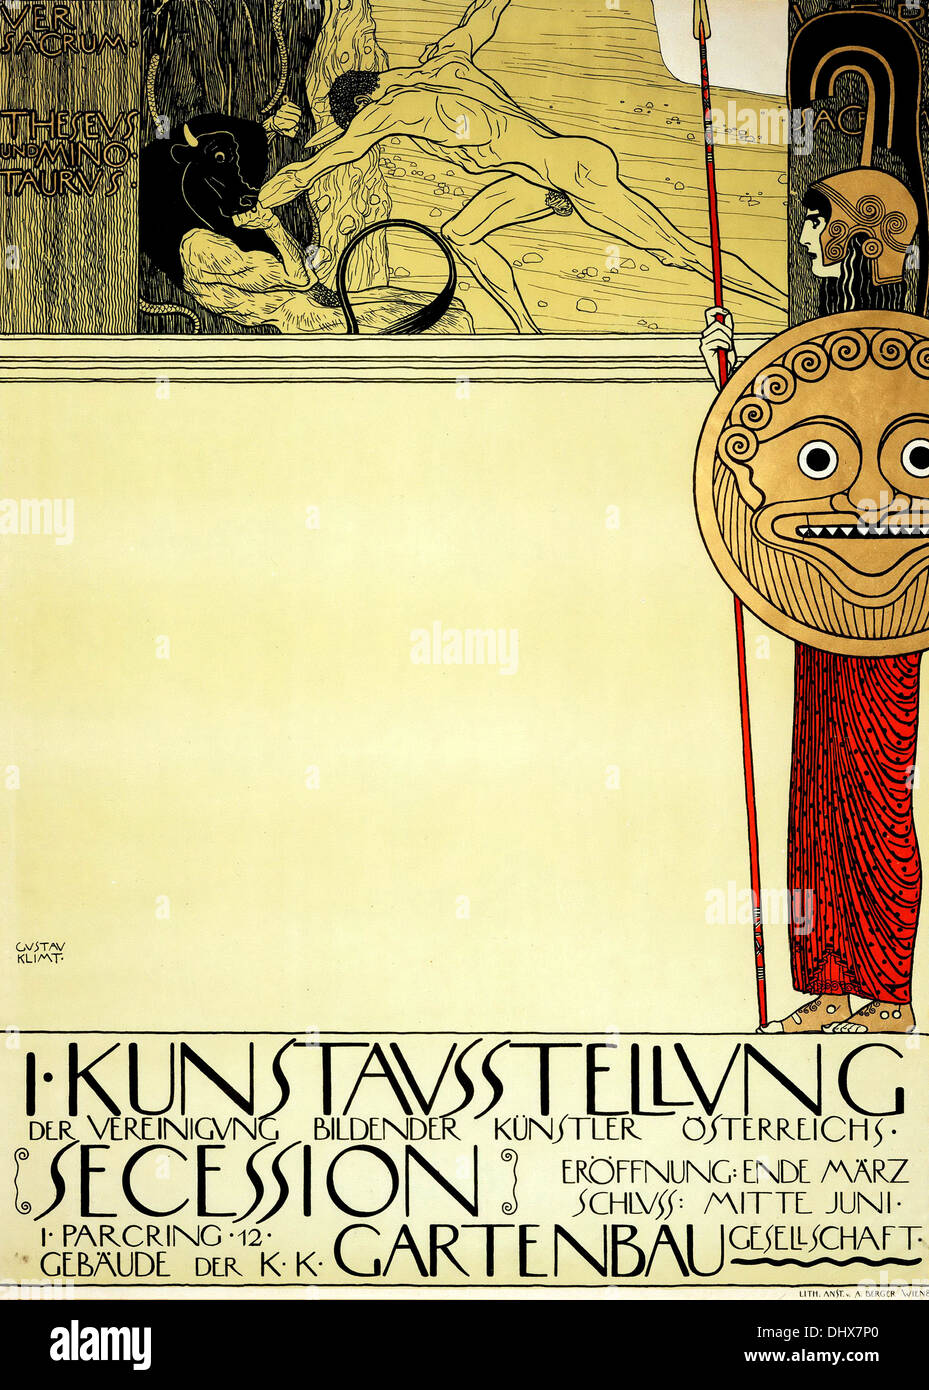 Poster for the 1st Secession exhibition - Gustav Klimt, 1898  - Editorial use only. Stock Photo